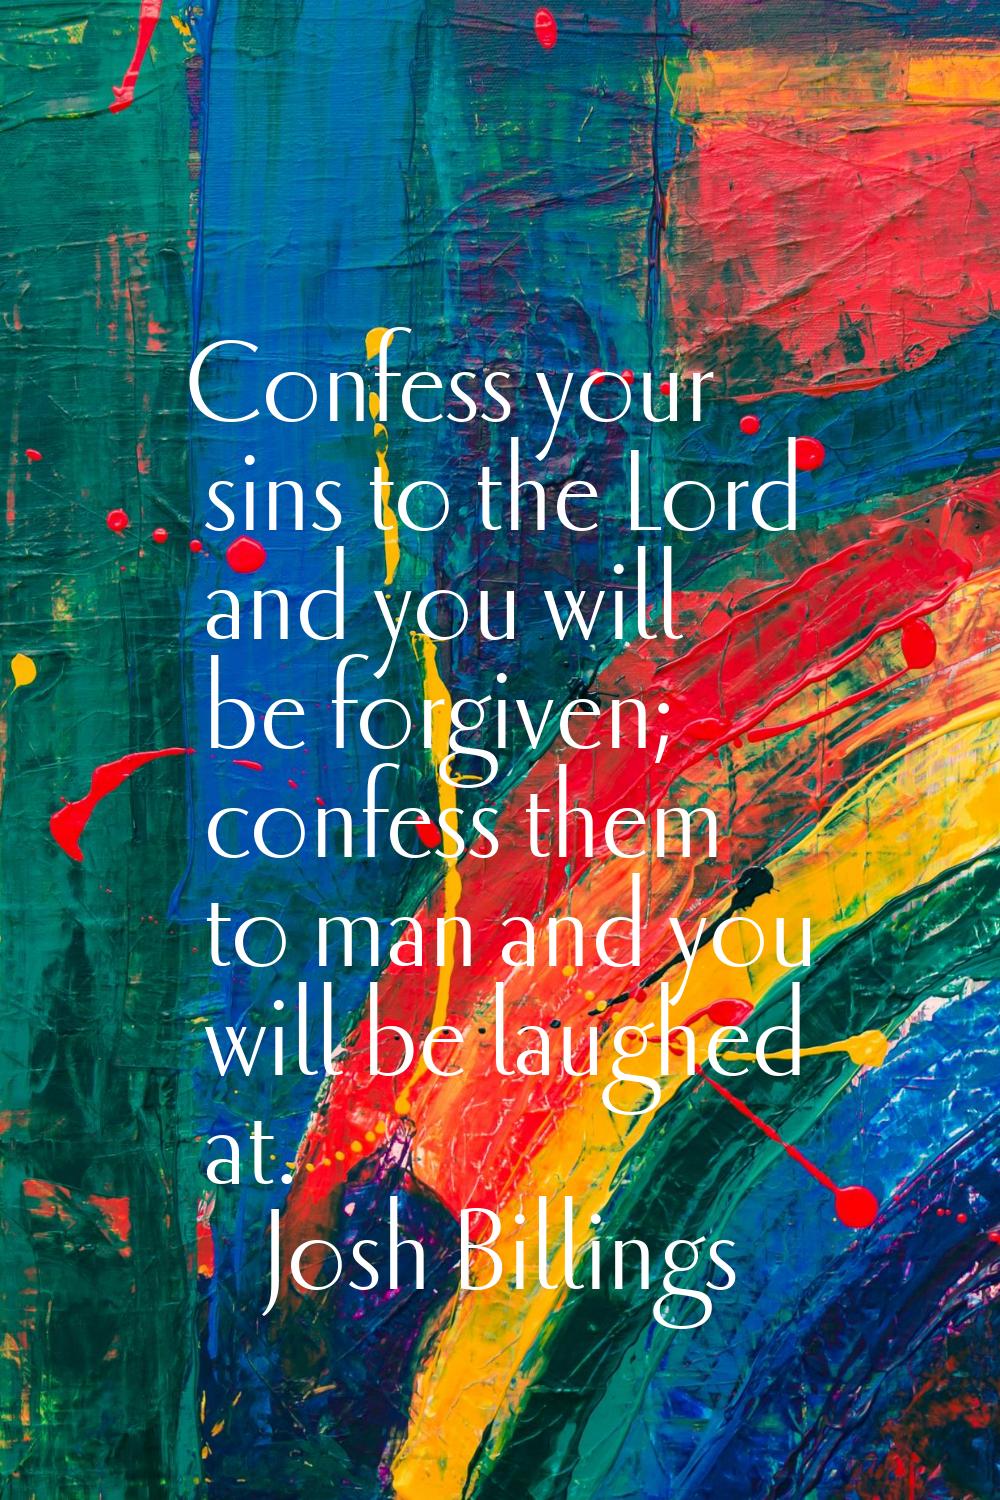 Confess your sins to the Lord and you will be forgiven; confess them to man and you will be laughed